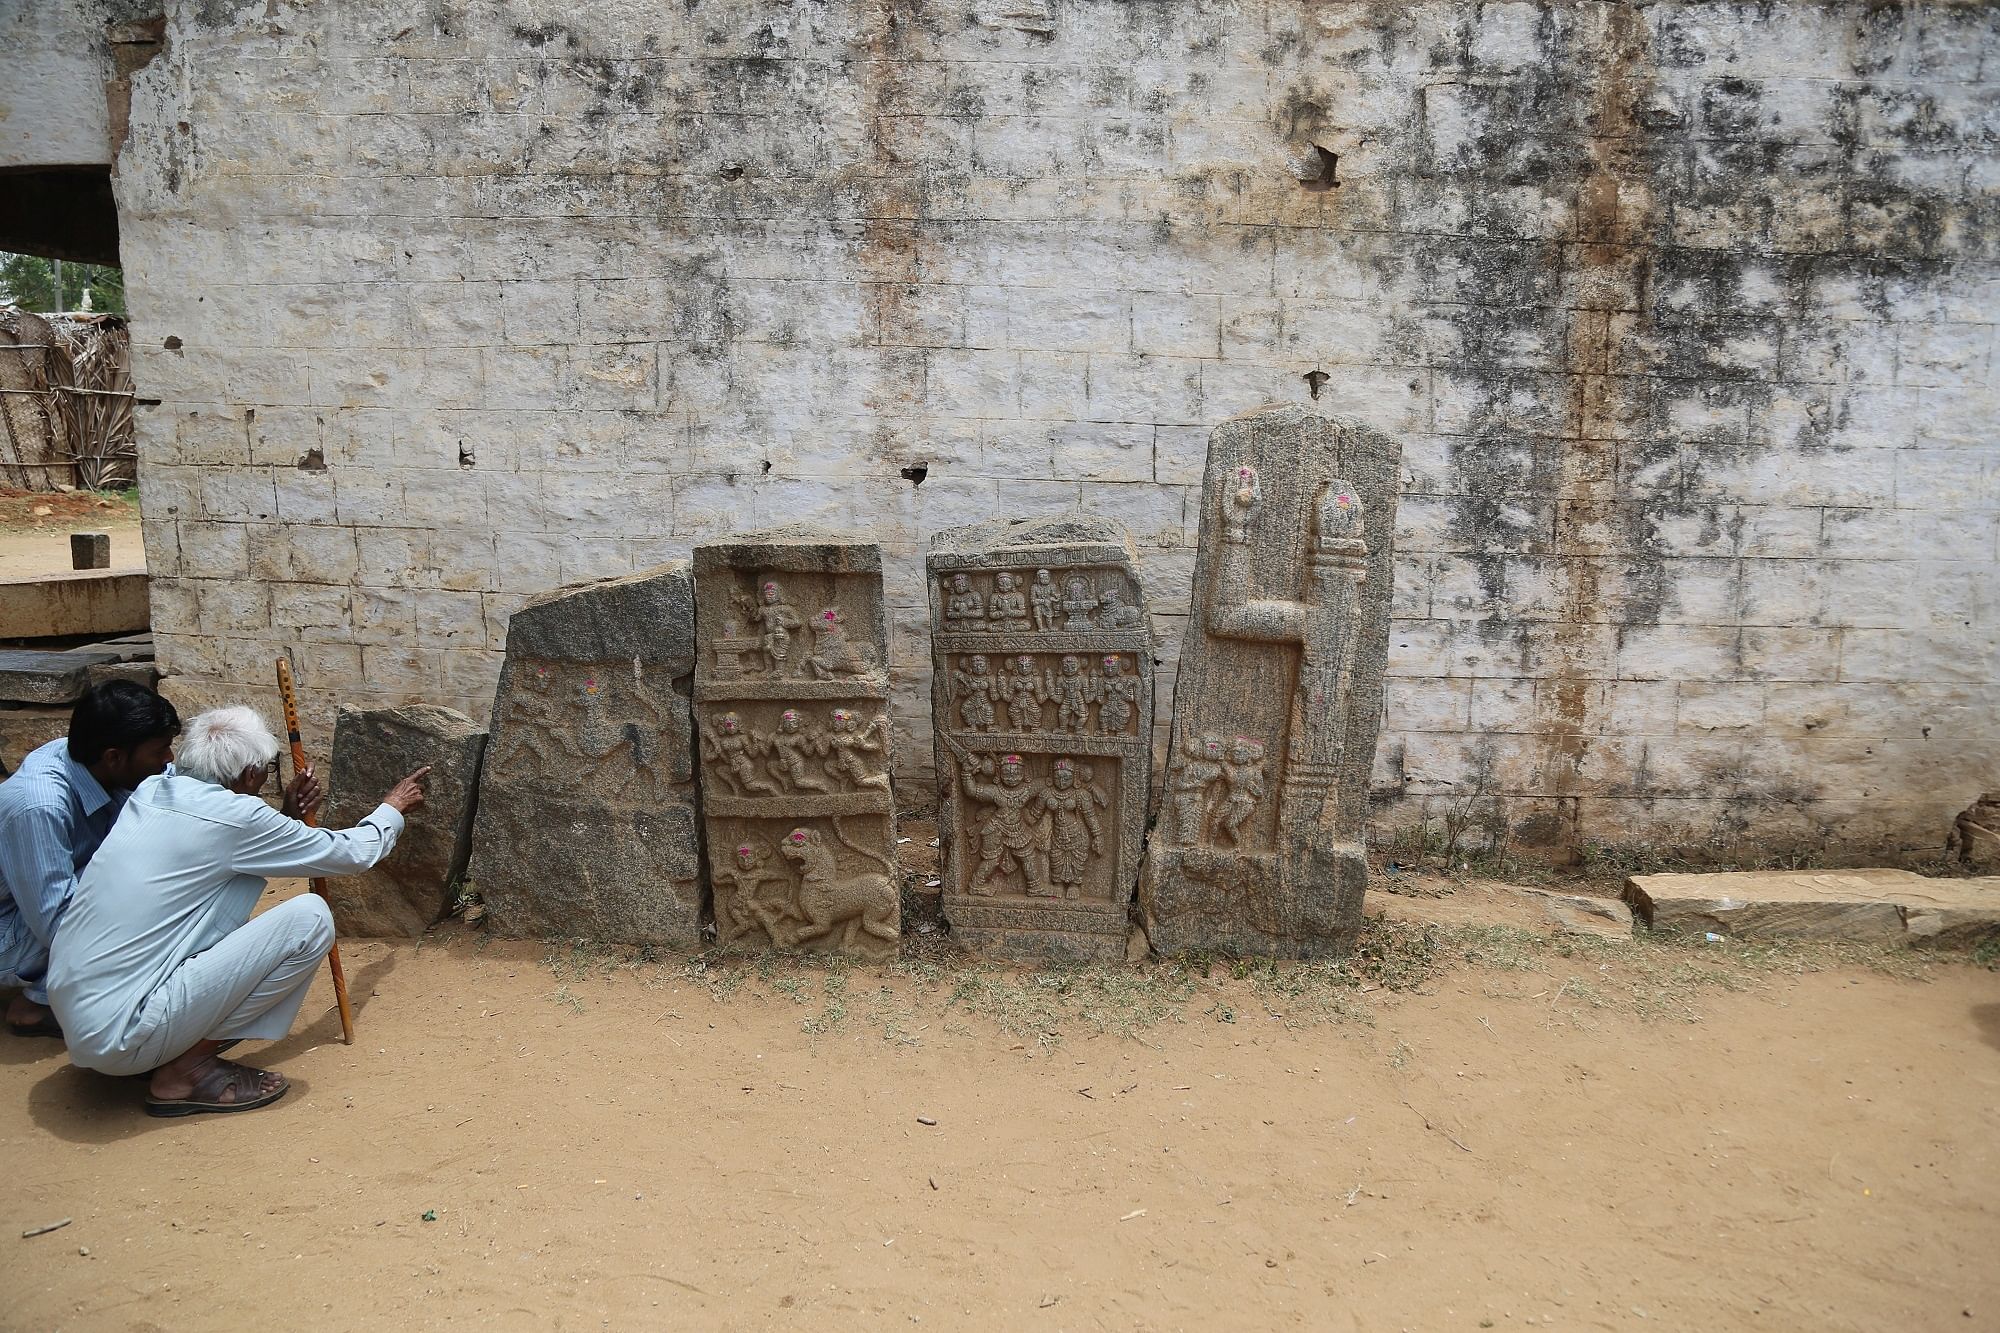 Memorial stones dedicated to individuals from all walks of life can be found at Amachavadi in Chamarajanagar district. PHOTO BY AUTHOR